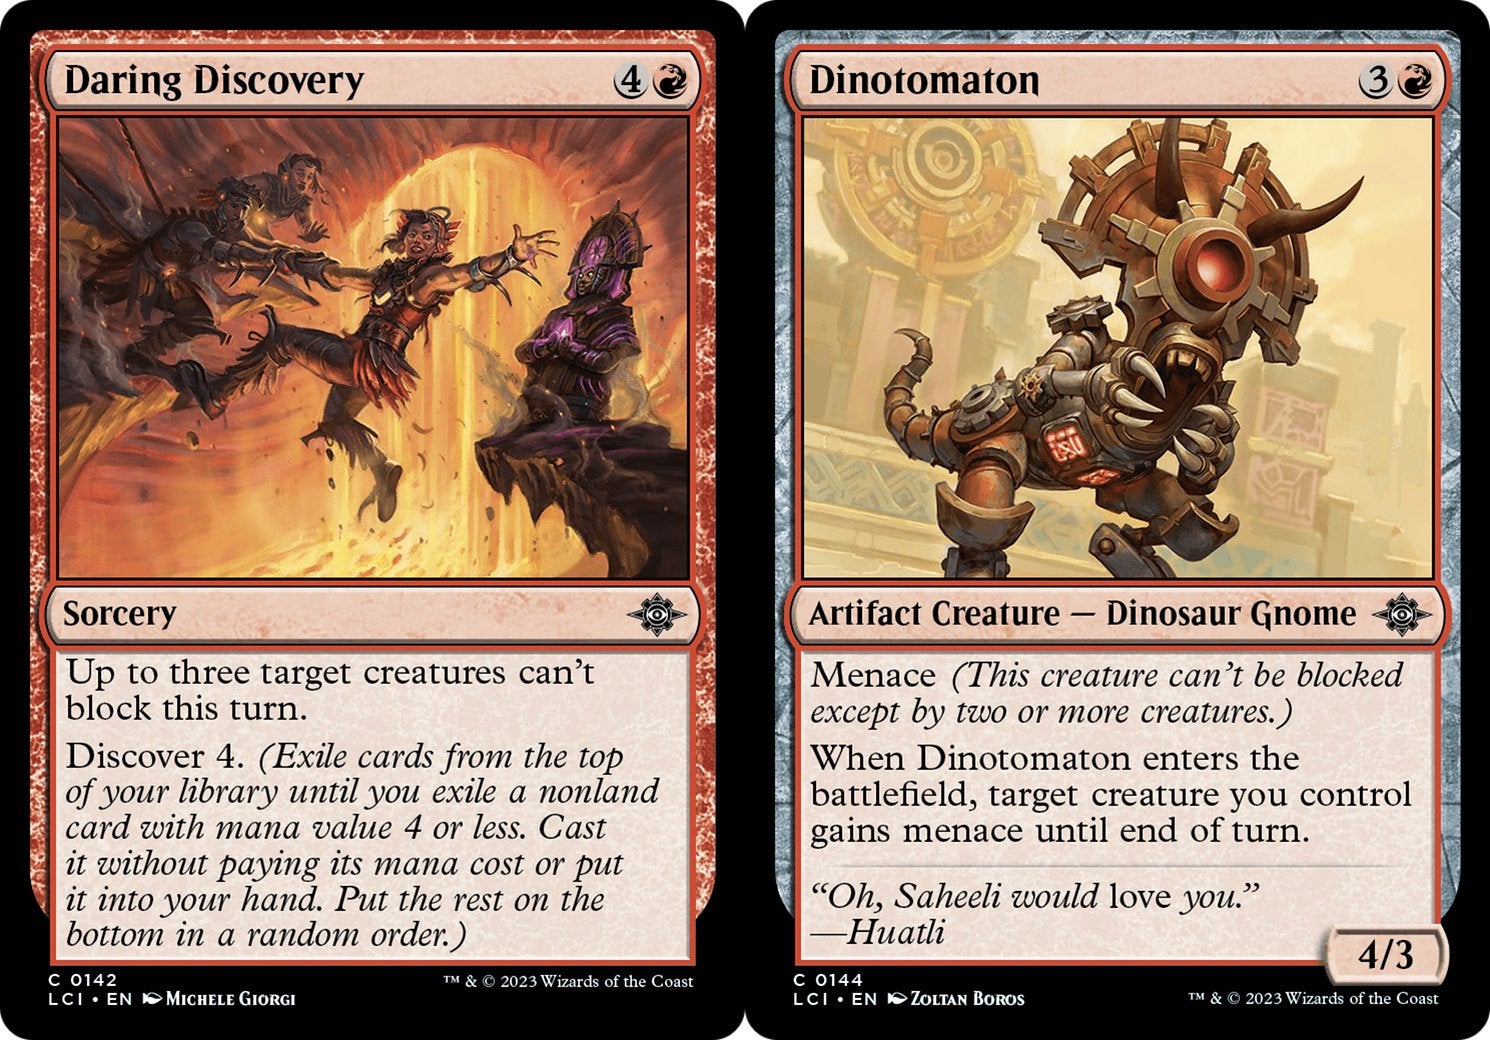 On the left is a red sorcery card from MTG with a Discover effect and on the right is a red creature card.